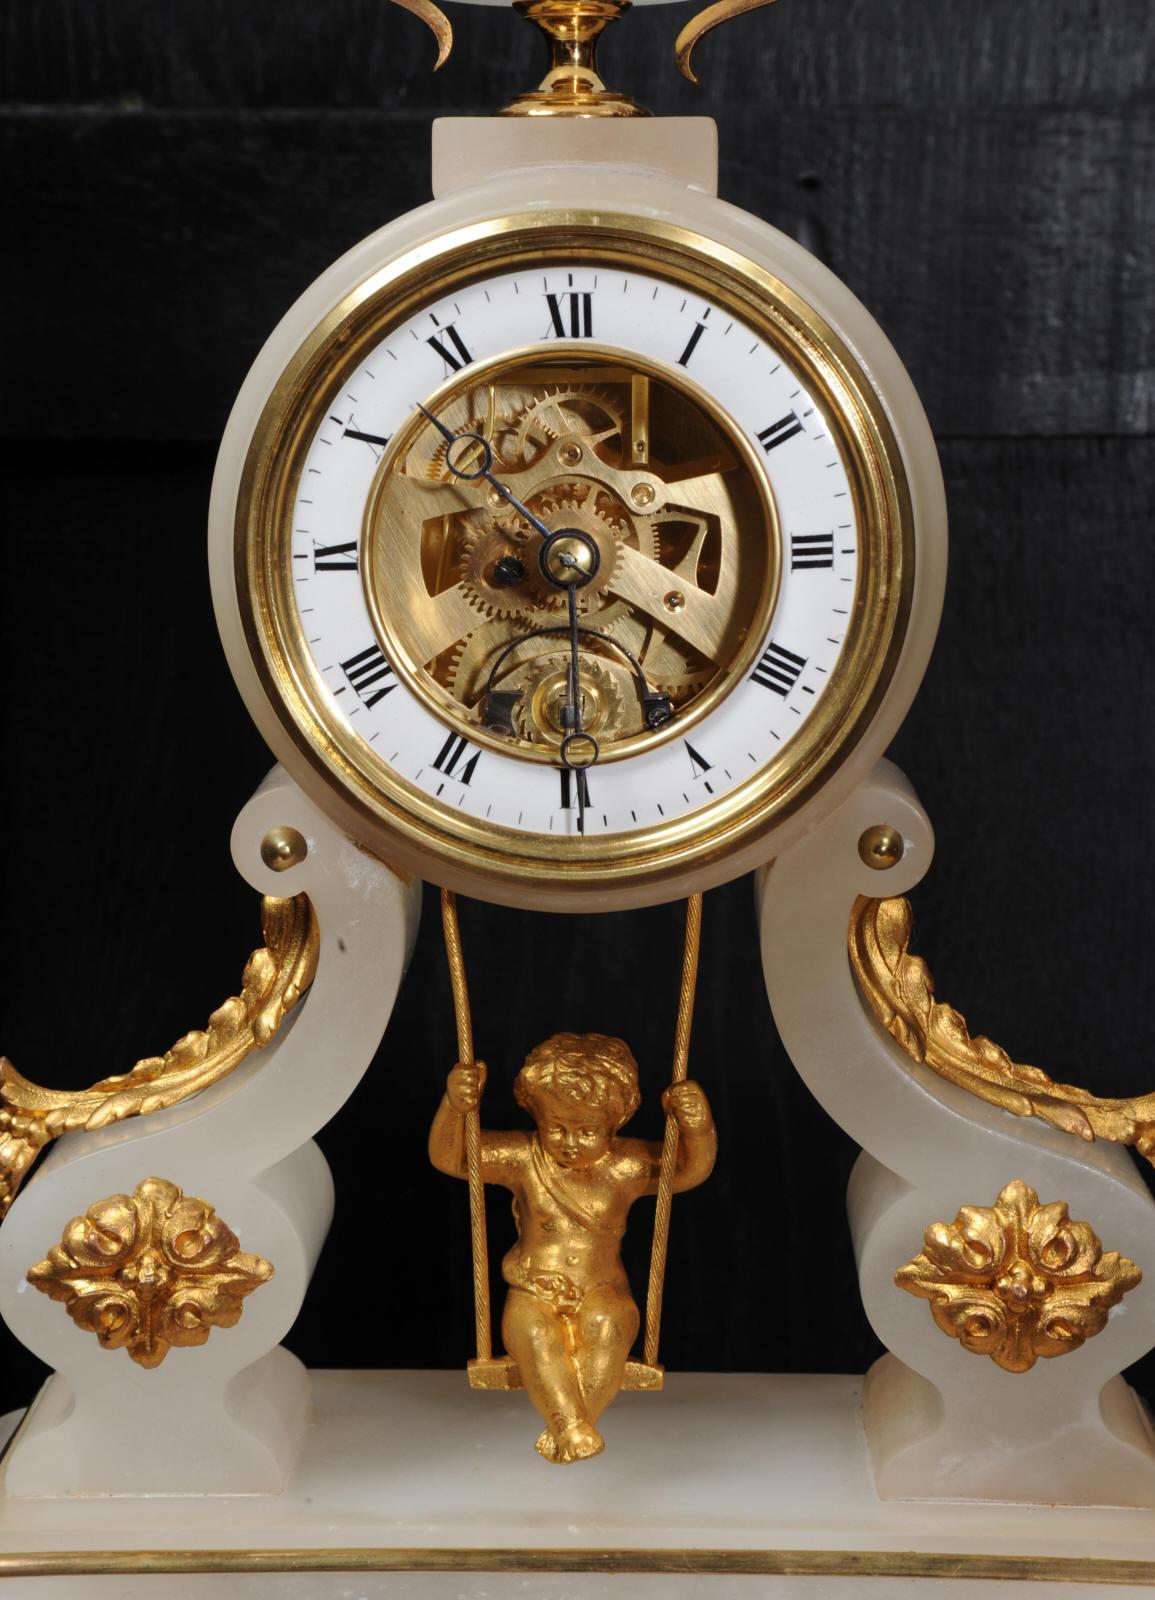 Rare Cherub on a Swing Antique French Boudoir Clock with Visible Escapement 1